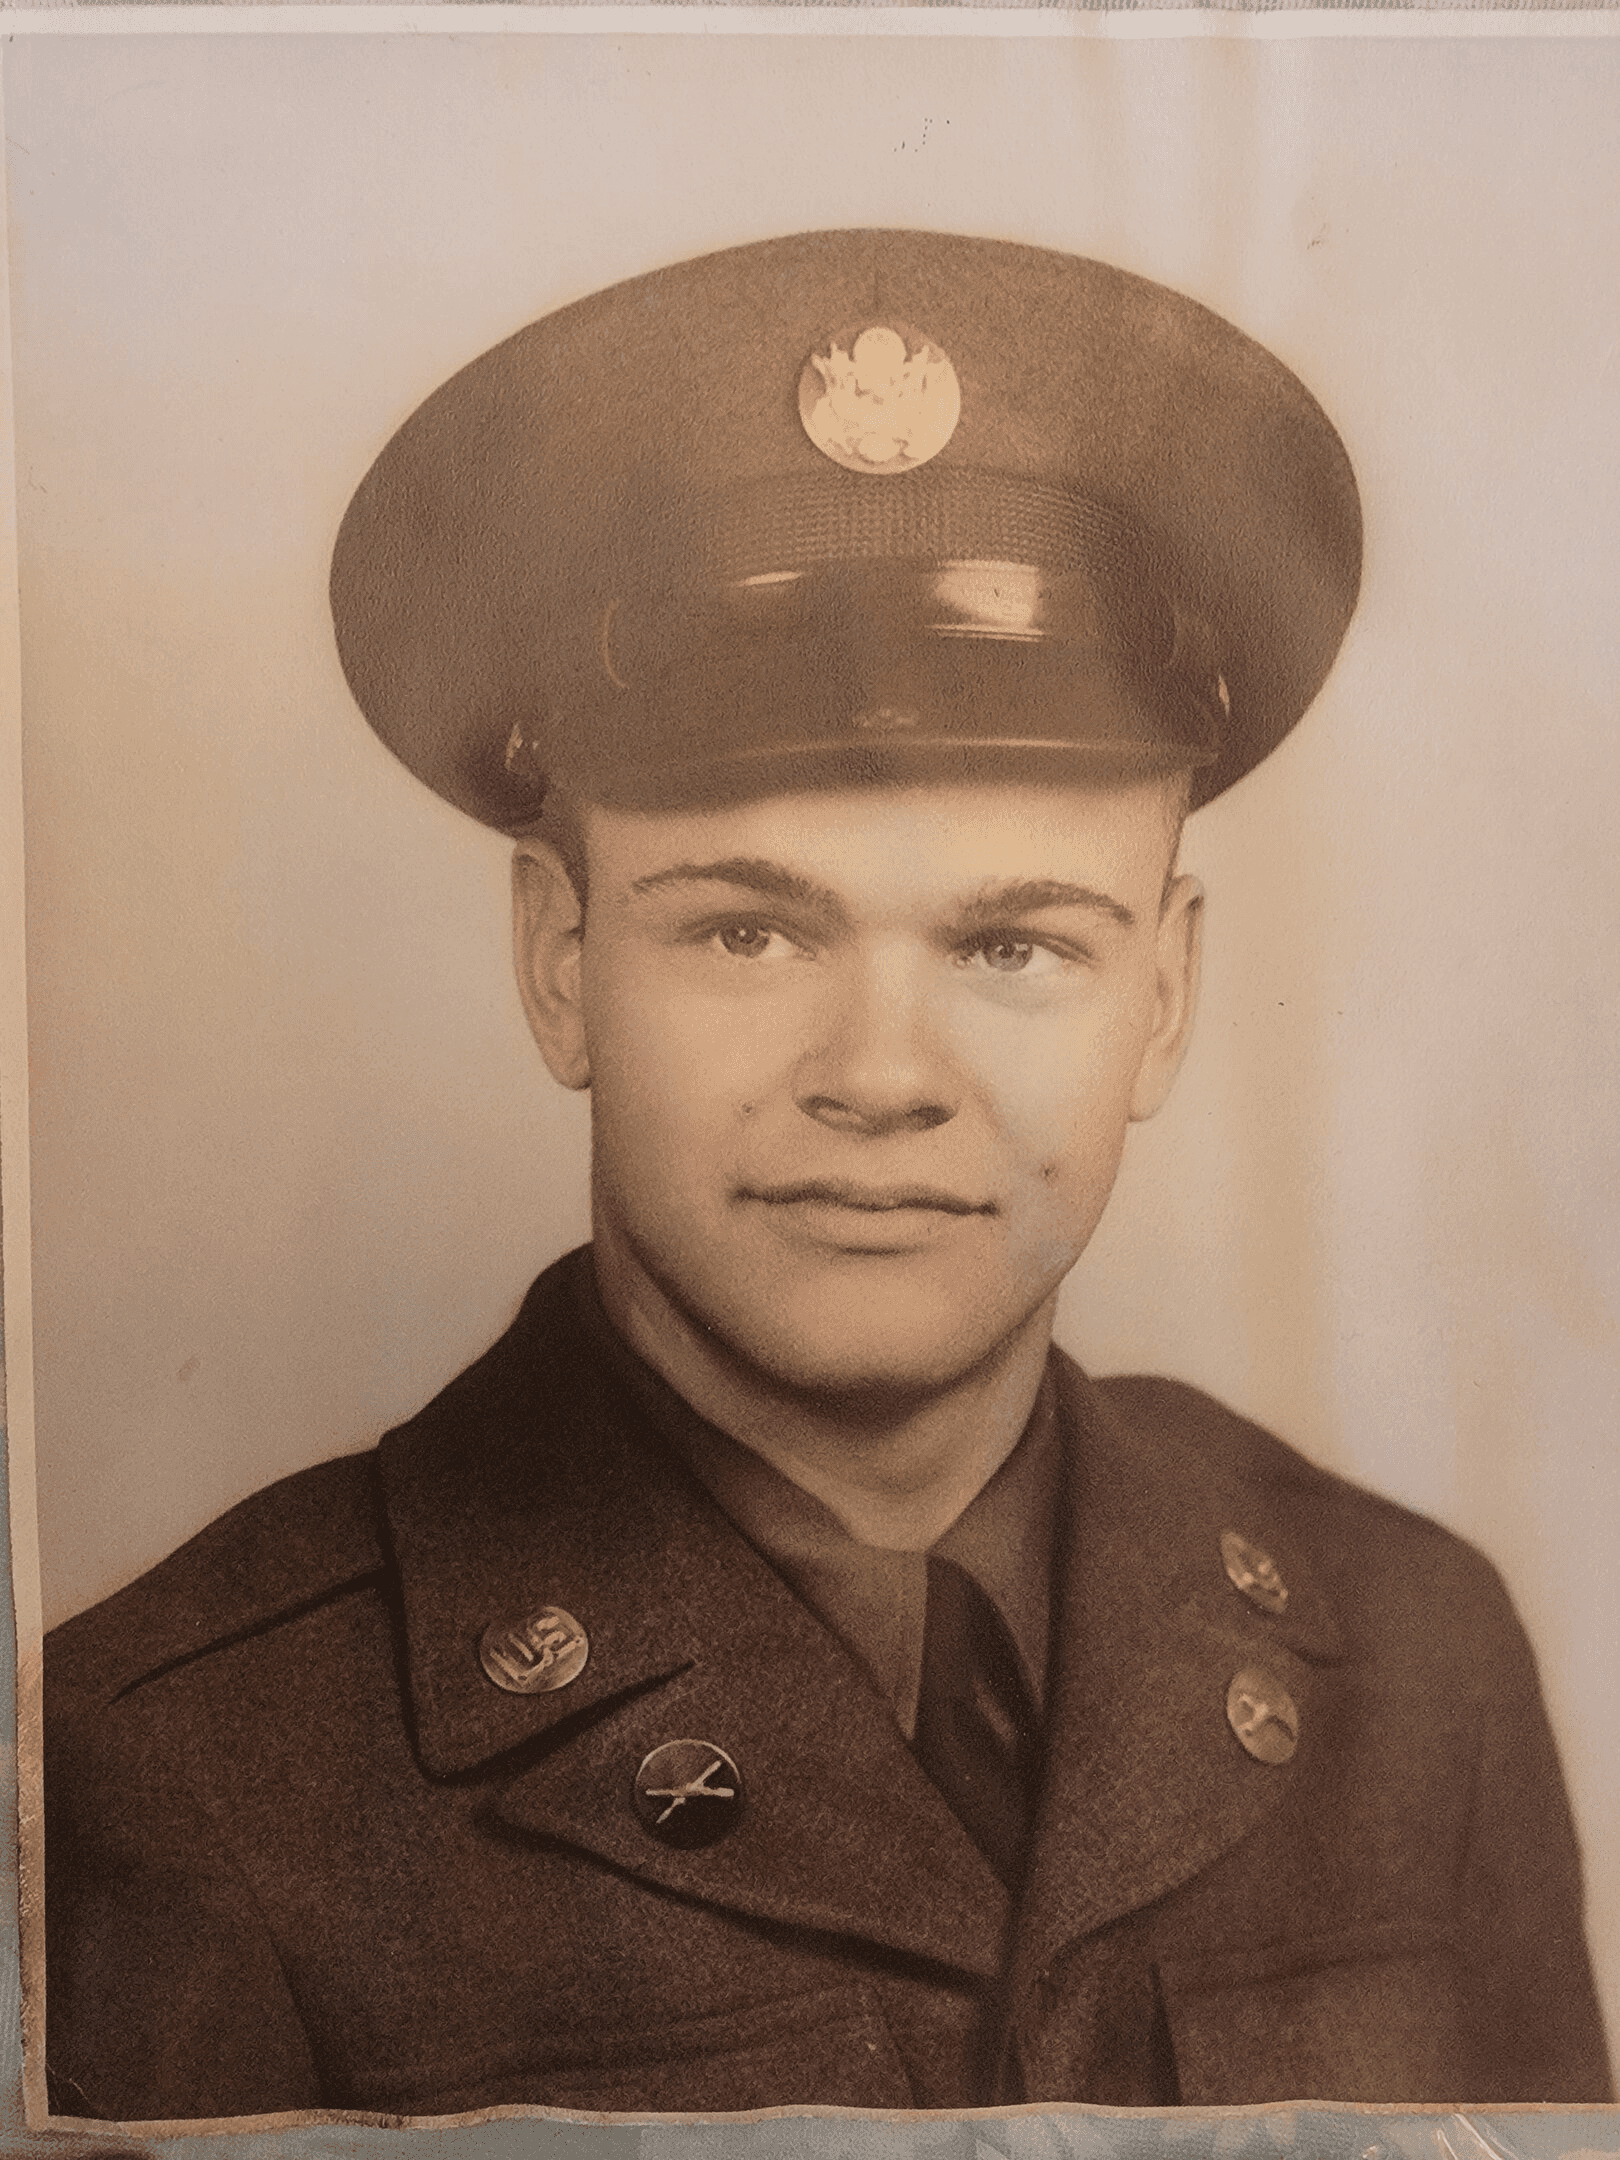 Remains of Korean War soldier identified as 17-year-old who went missing 74 years ago